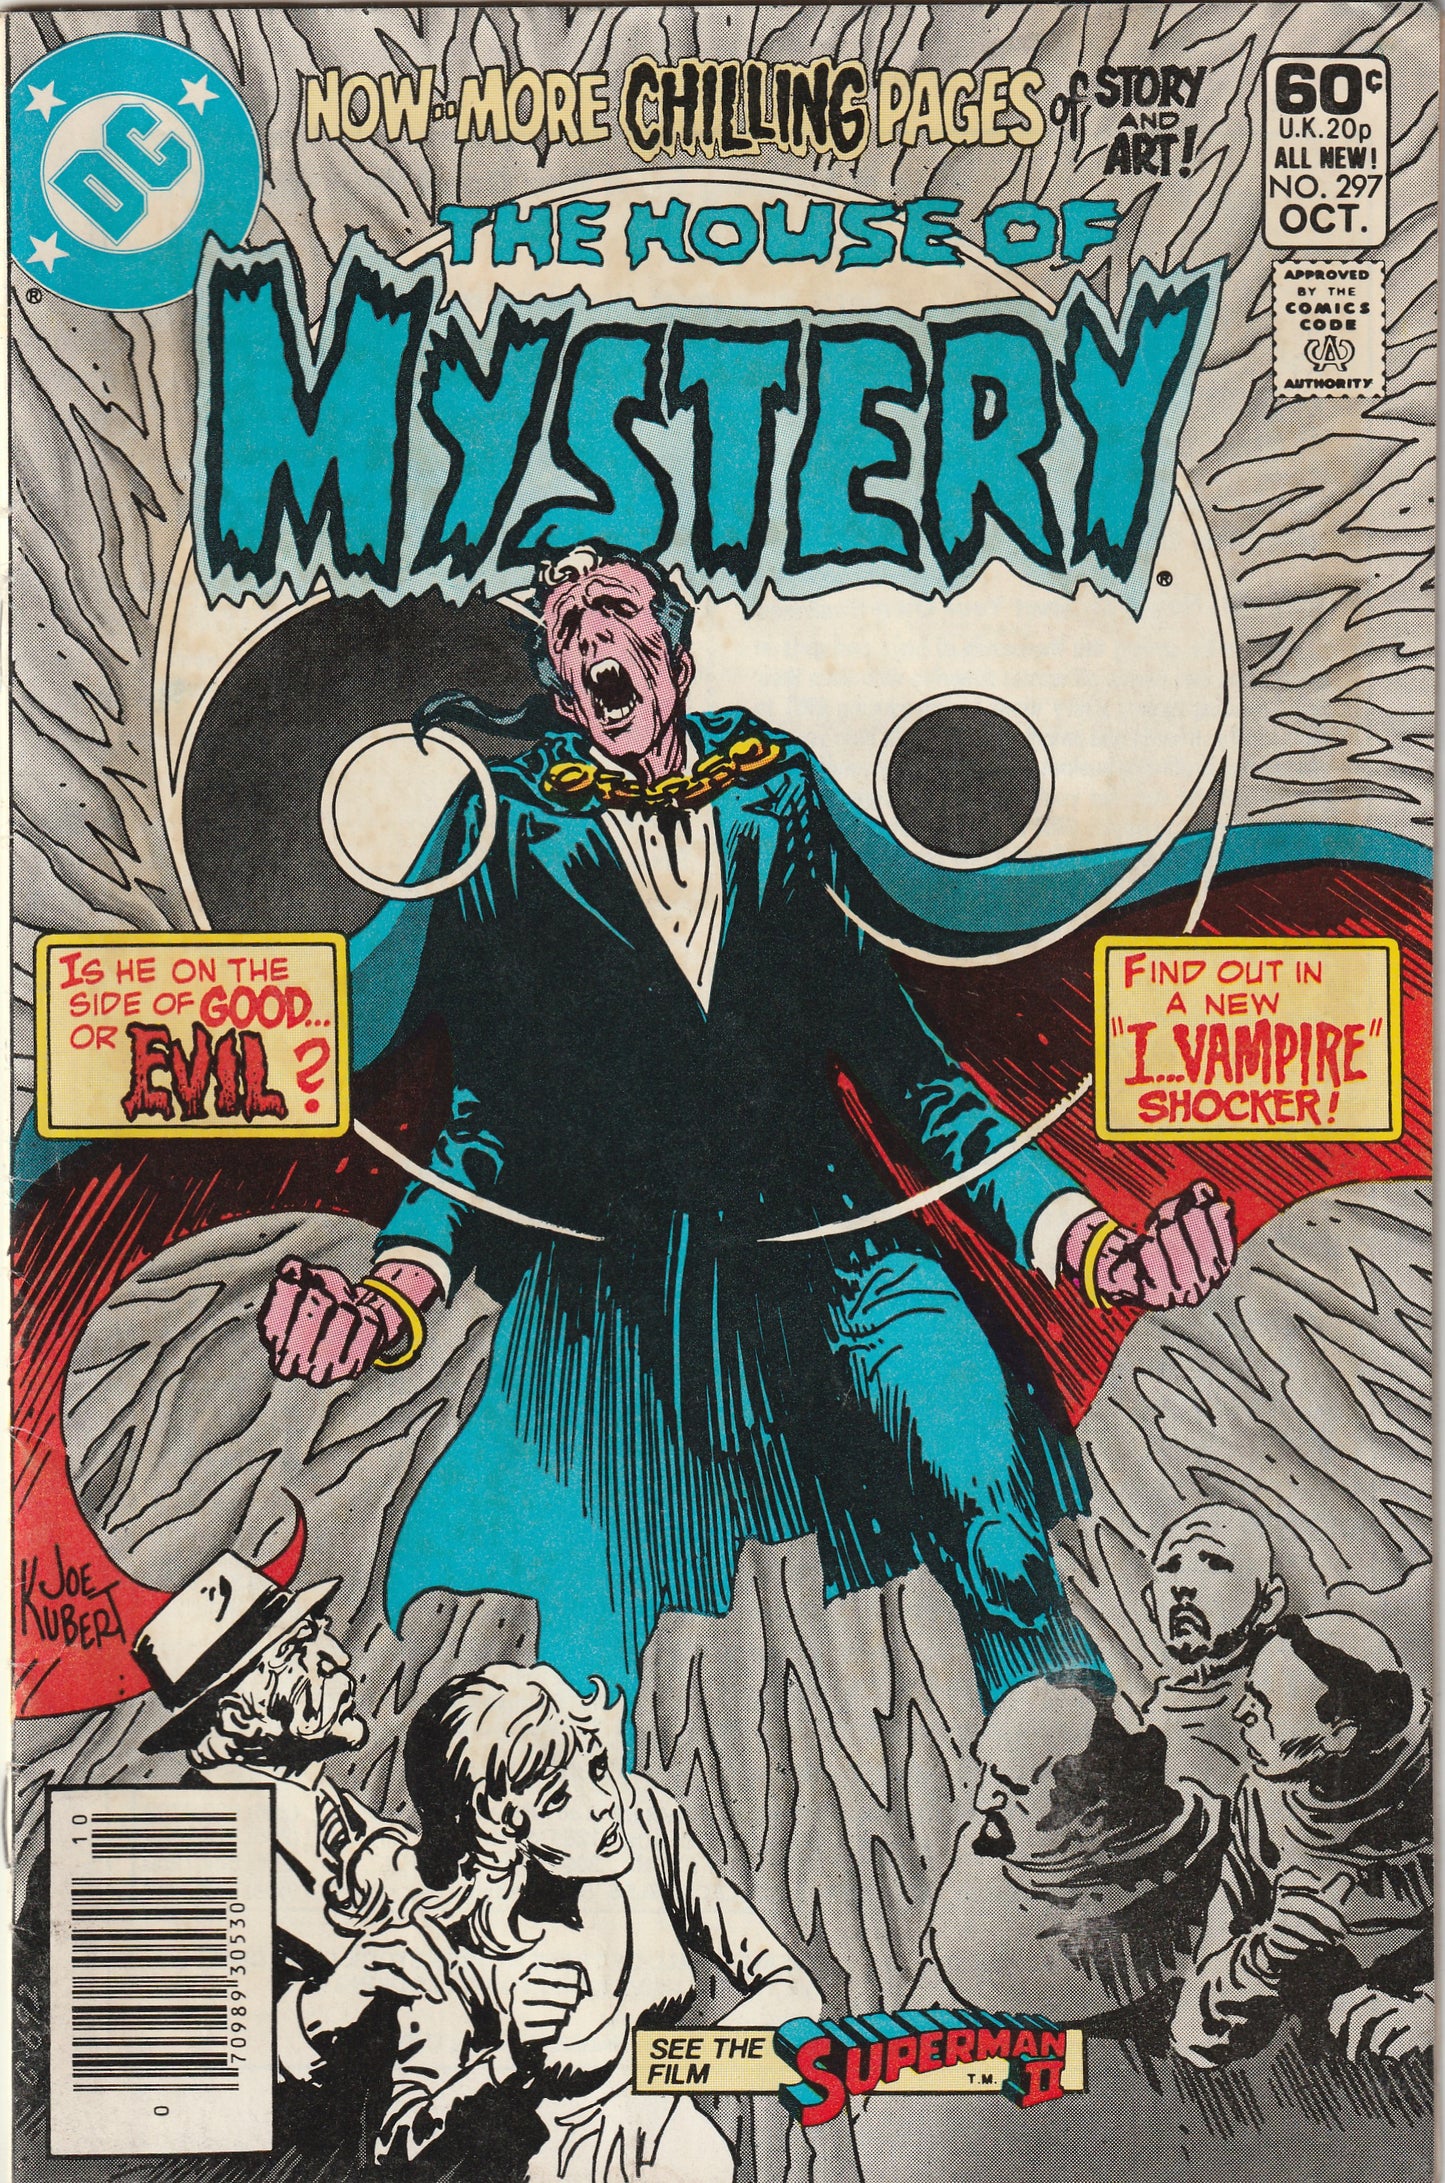 House of Mystery #297 (1981)